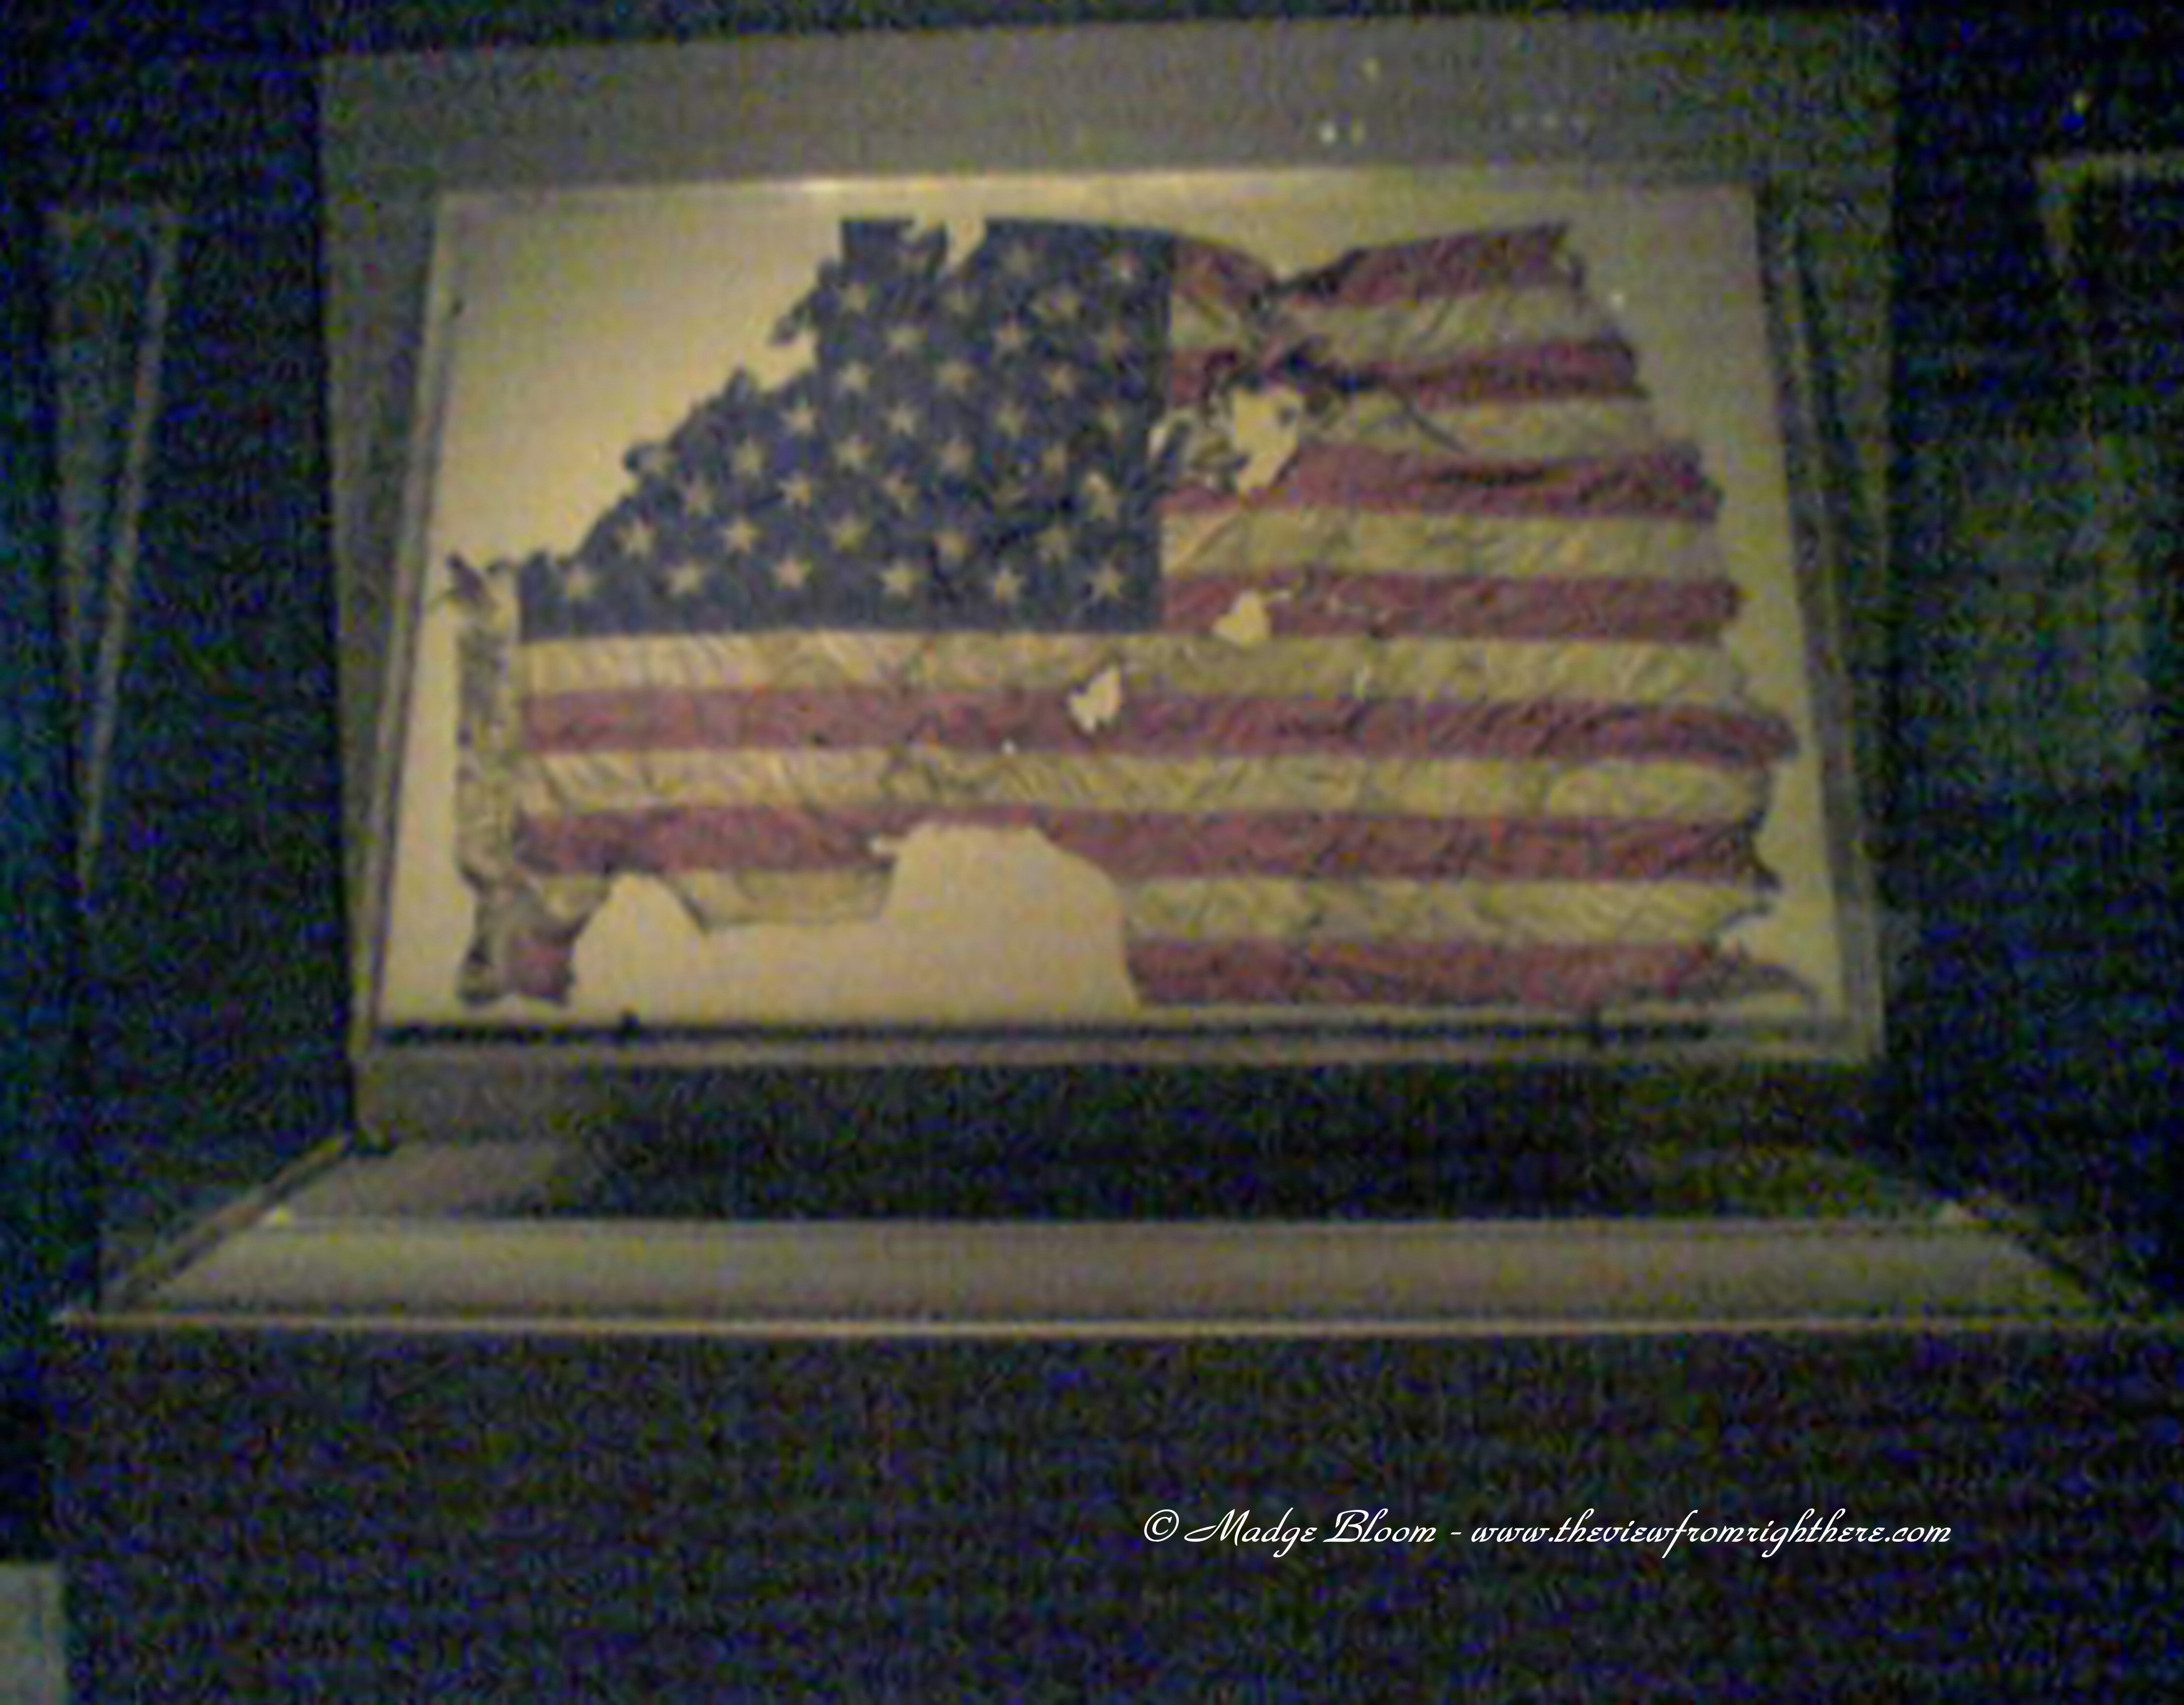 Our Flag Was Still There at Ground Zero